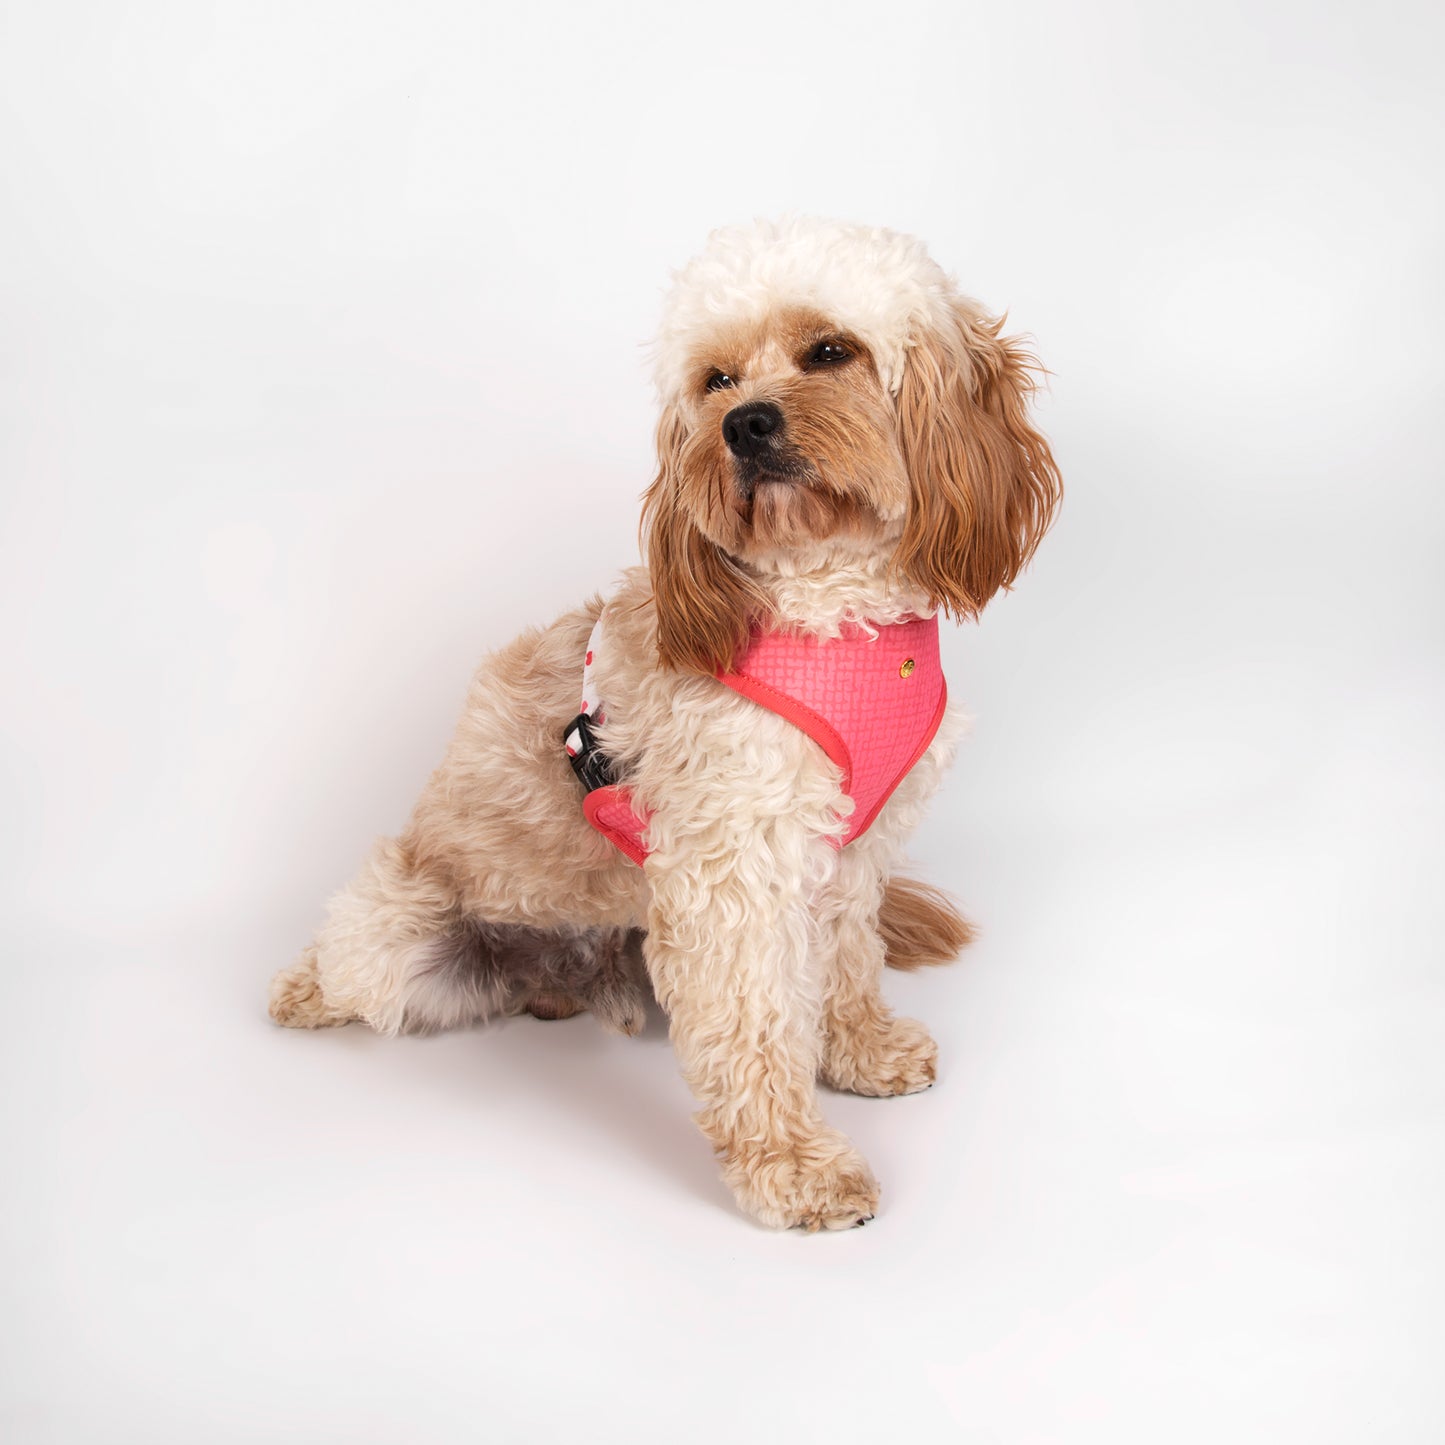 Pata Paw blush hearts reversible harness as seen in a medium-sized dog. Reverse design showing a a timeless and chic texture pattern in blush.